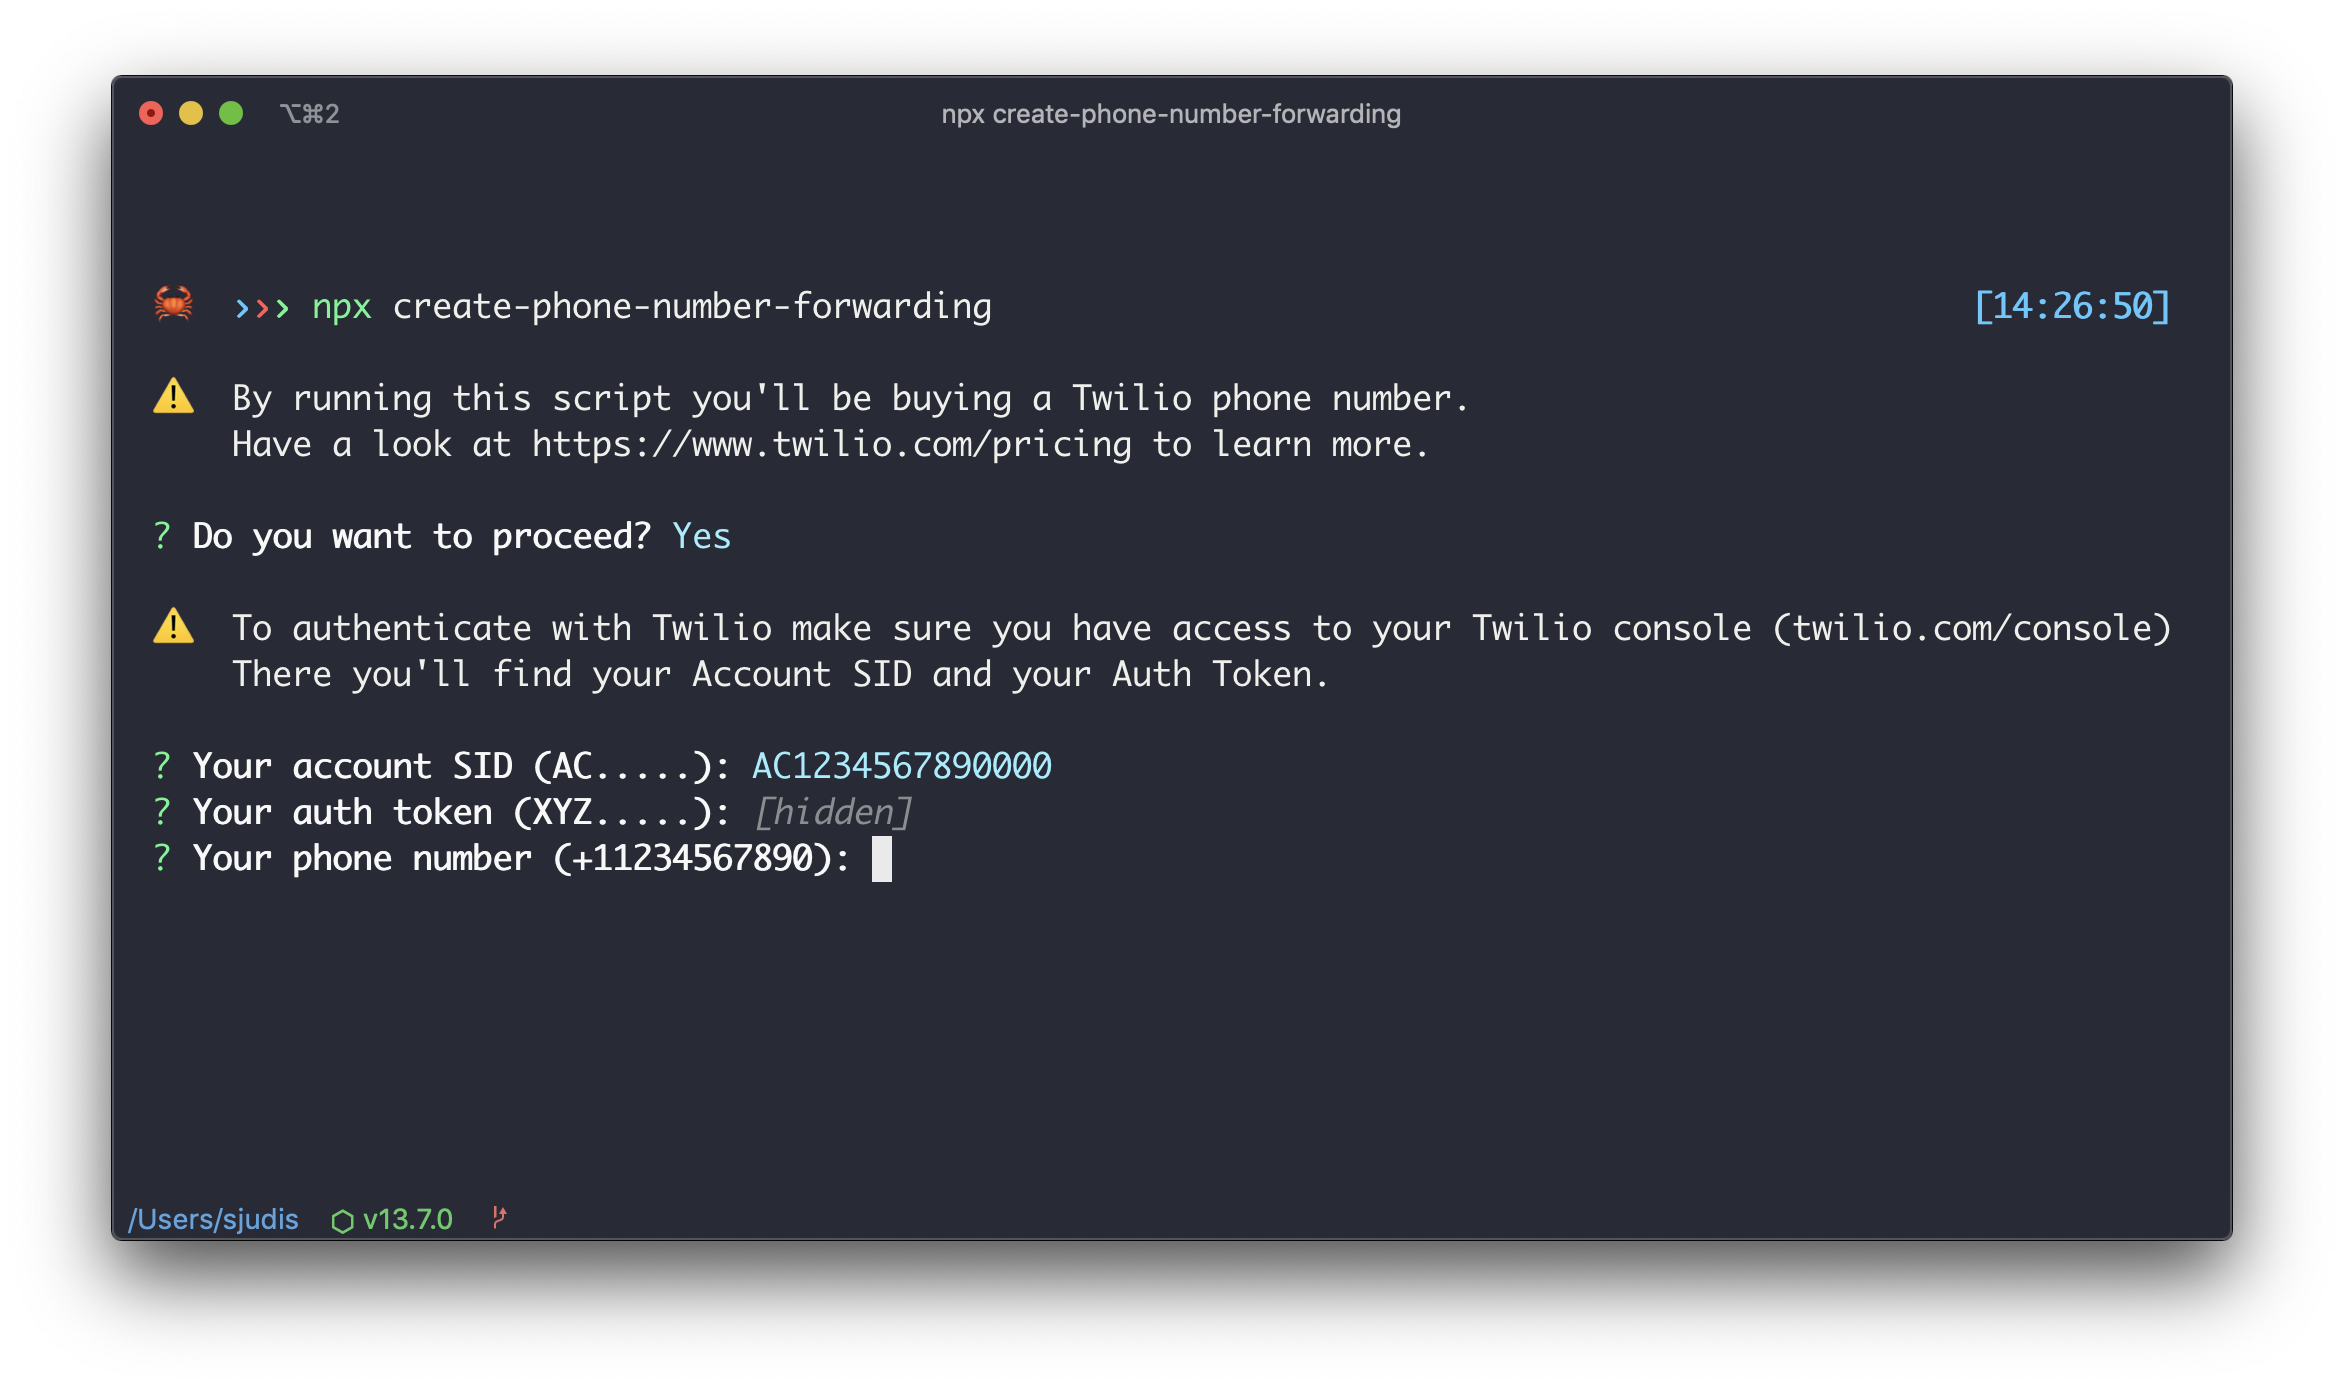 create-phone-number-forwarding in the terminal